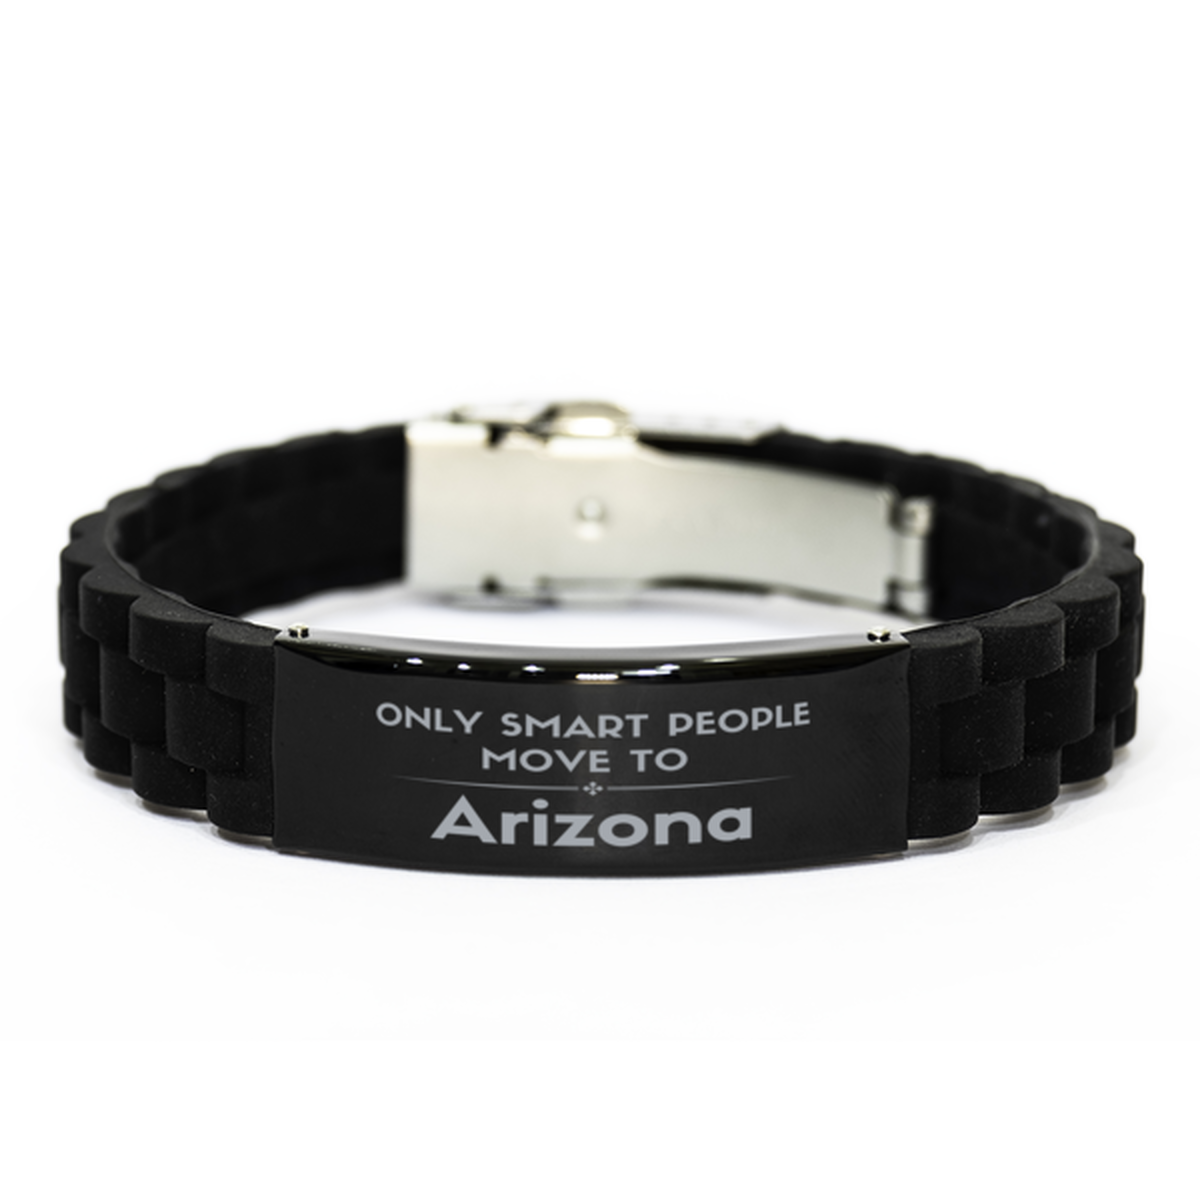 Only smart people move to Arizona Black Glidelock Clasp Bracelet, Gag Gifts For Arizona, Move to Arizona Gifts for Friends Coworker Funny Saying Quote